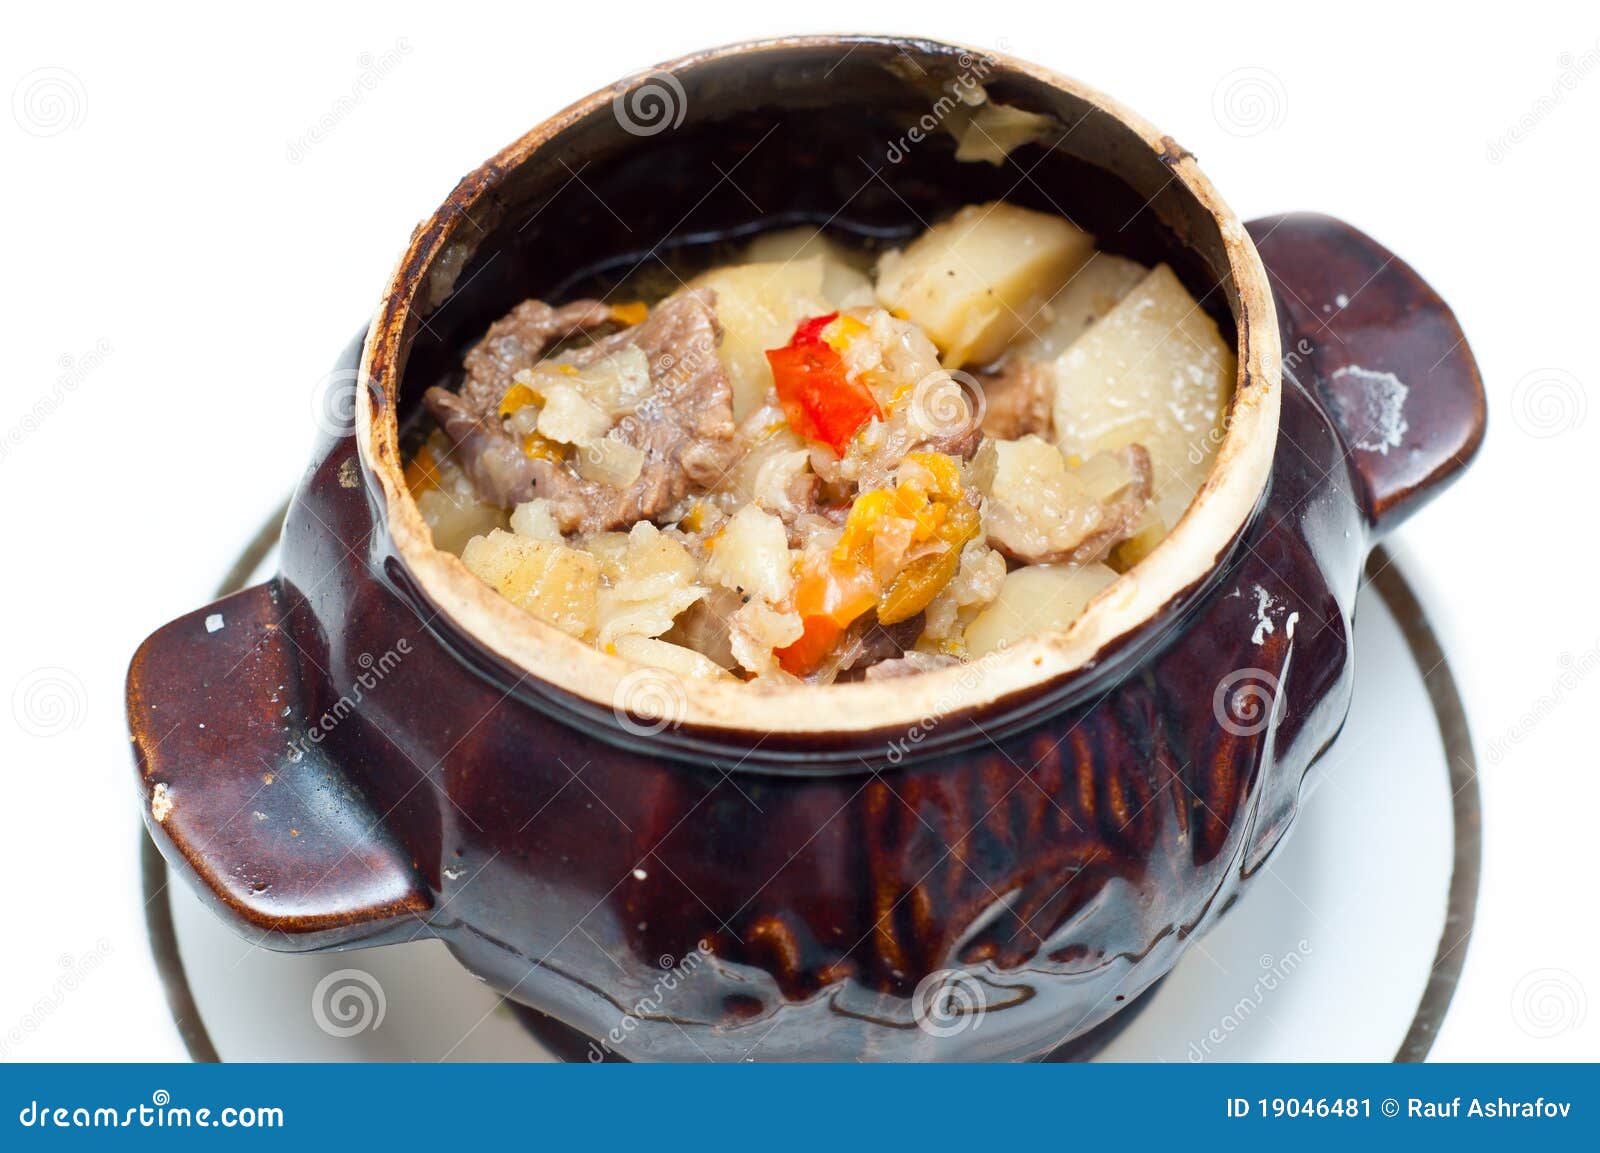 crock pot full of beef and potato soup